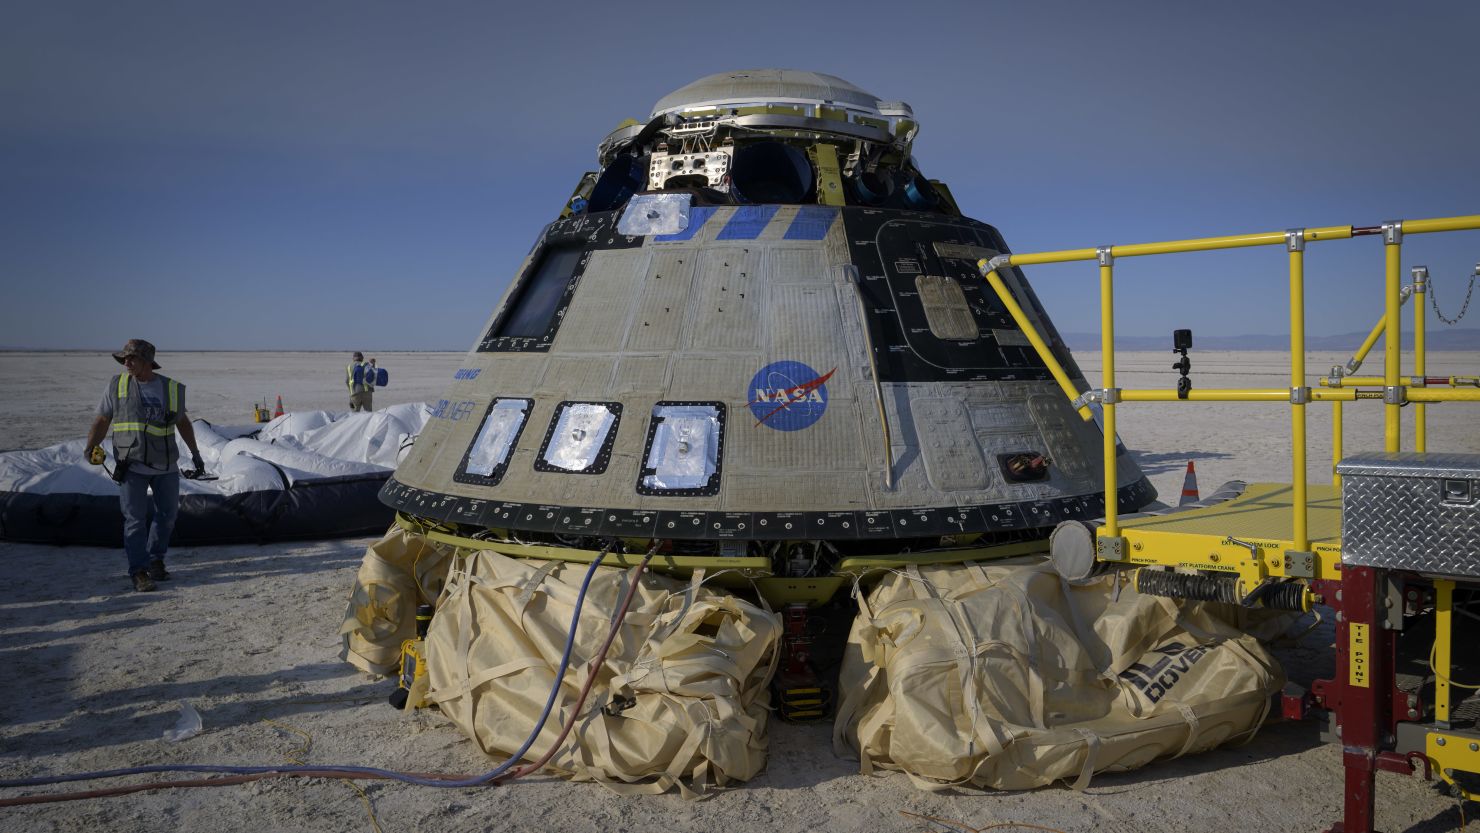 WHITE SANDS MISSILE RANGE, NM - MAY 25:  In this handout provided by the National Aeronautics and Space Administration (NASA), Boeing and NASA teams work around Boeings CST-100 Starliner spacecraft after it landed at White Sands Missile Ranges Space Harbor, on May 25, 2022 at the White Sands Missle Range, New Mexico. Boeing's Orbital Flight Test-2 (OFT-2) is Starliners second uncrewed flight test to the International Space Station as part of NASA's Commercial Crew Program. OFT-2 serves as an end-to-end test of the system's capabilities.  (Photo by Bill Ingalls/NASA via Getty Images)